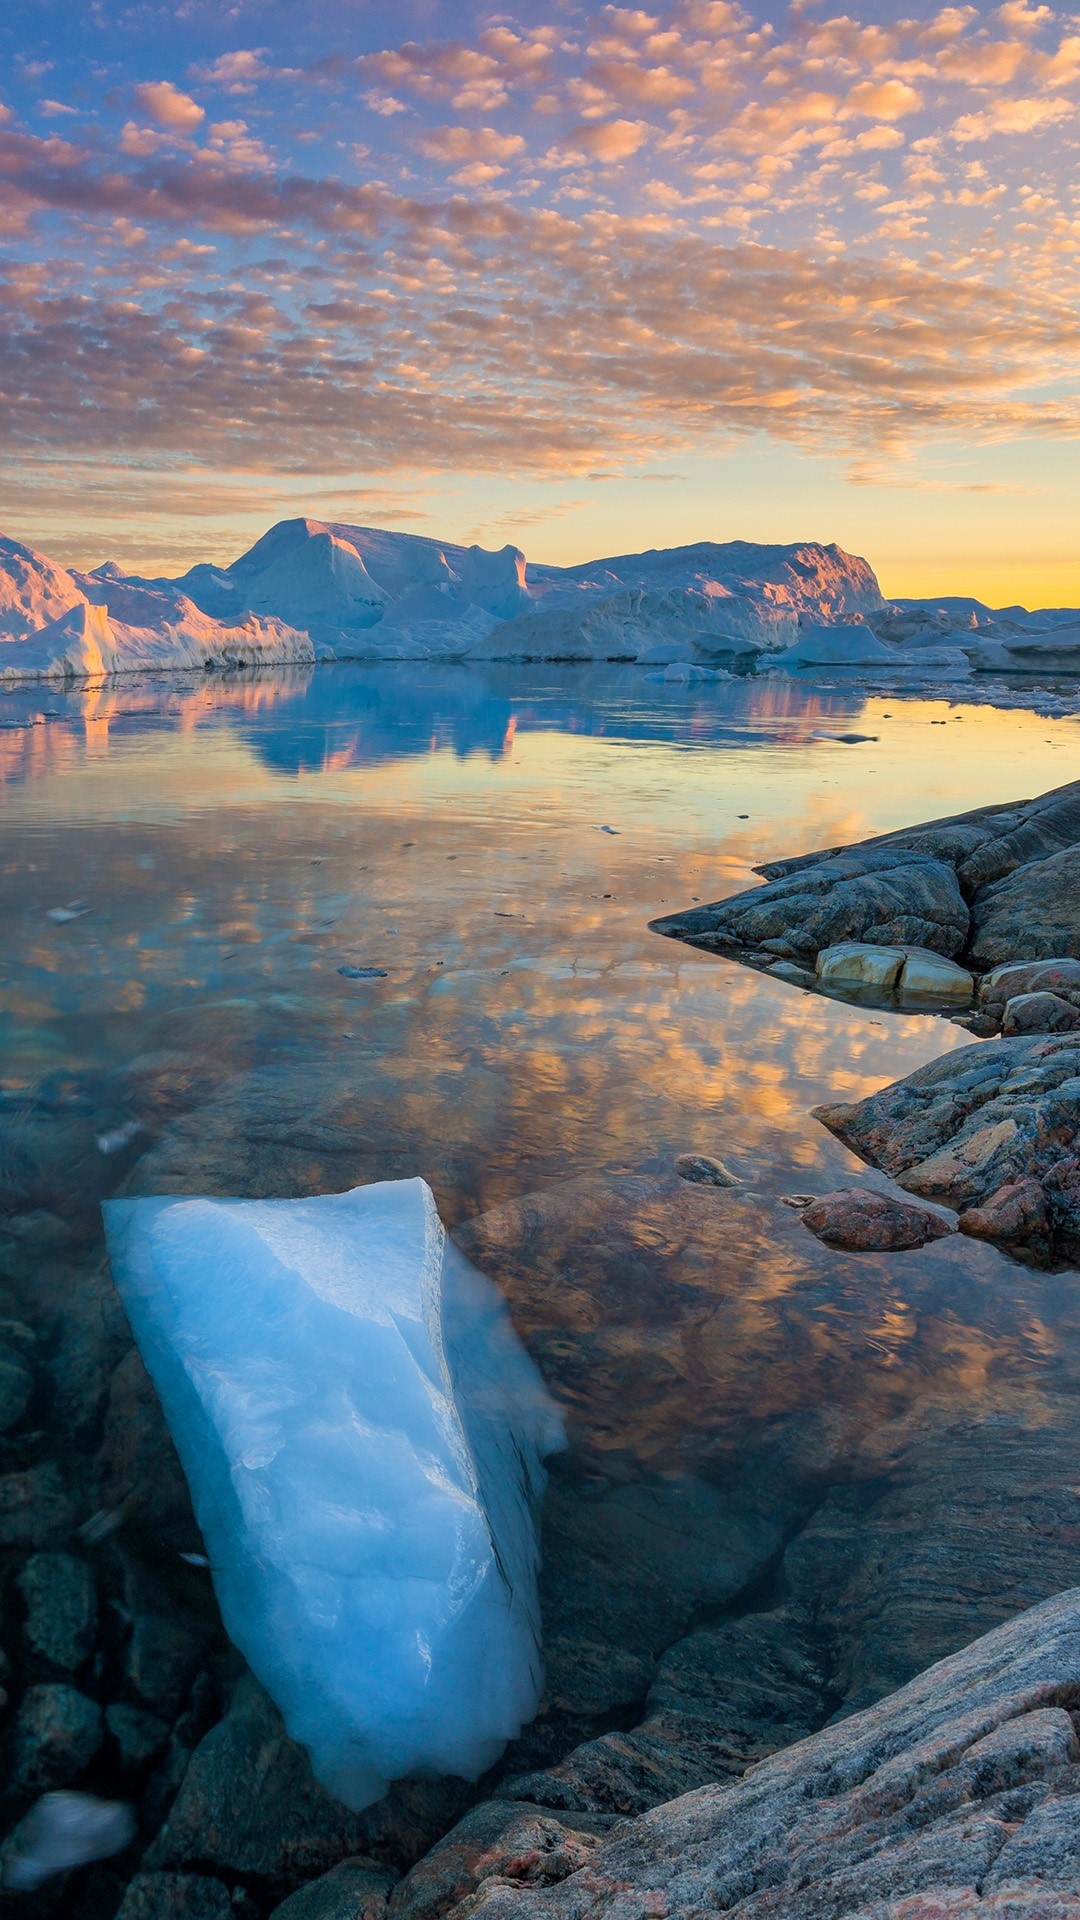 Greenland: Ilulissat Icefjord, The ice sheet covers more than 80% of the island. 1080x1920 Full HD Wallpaper.